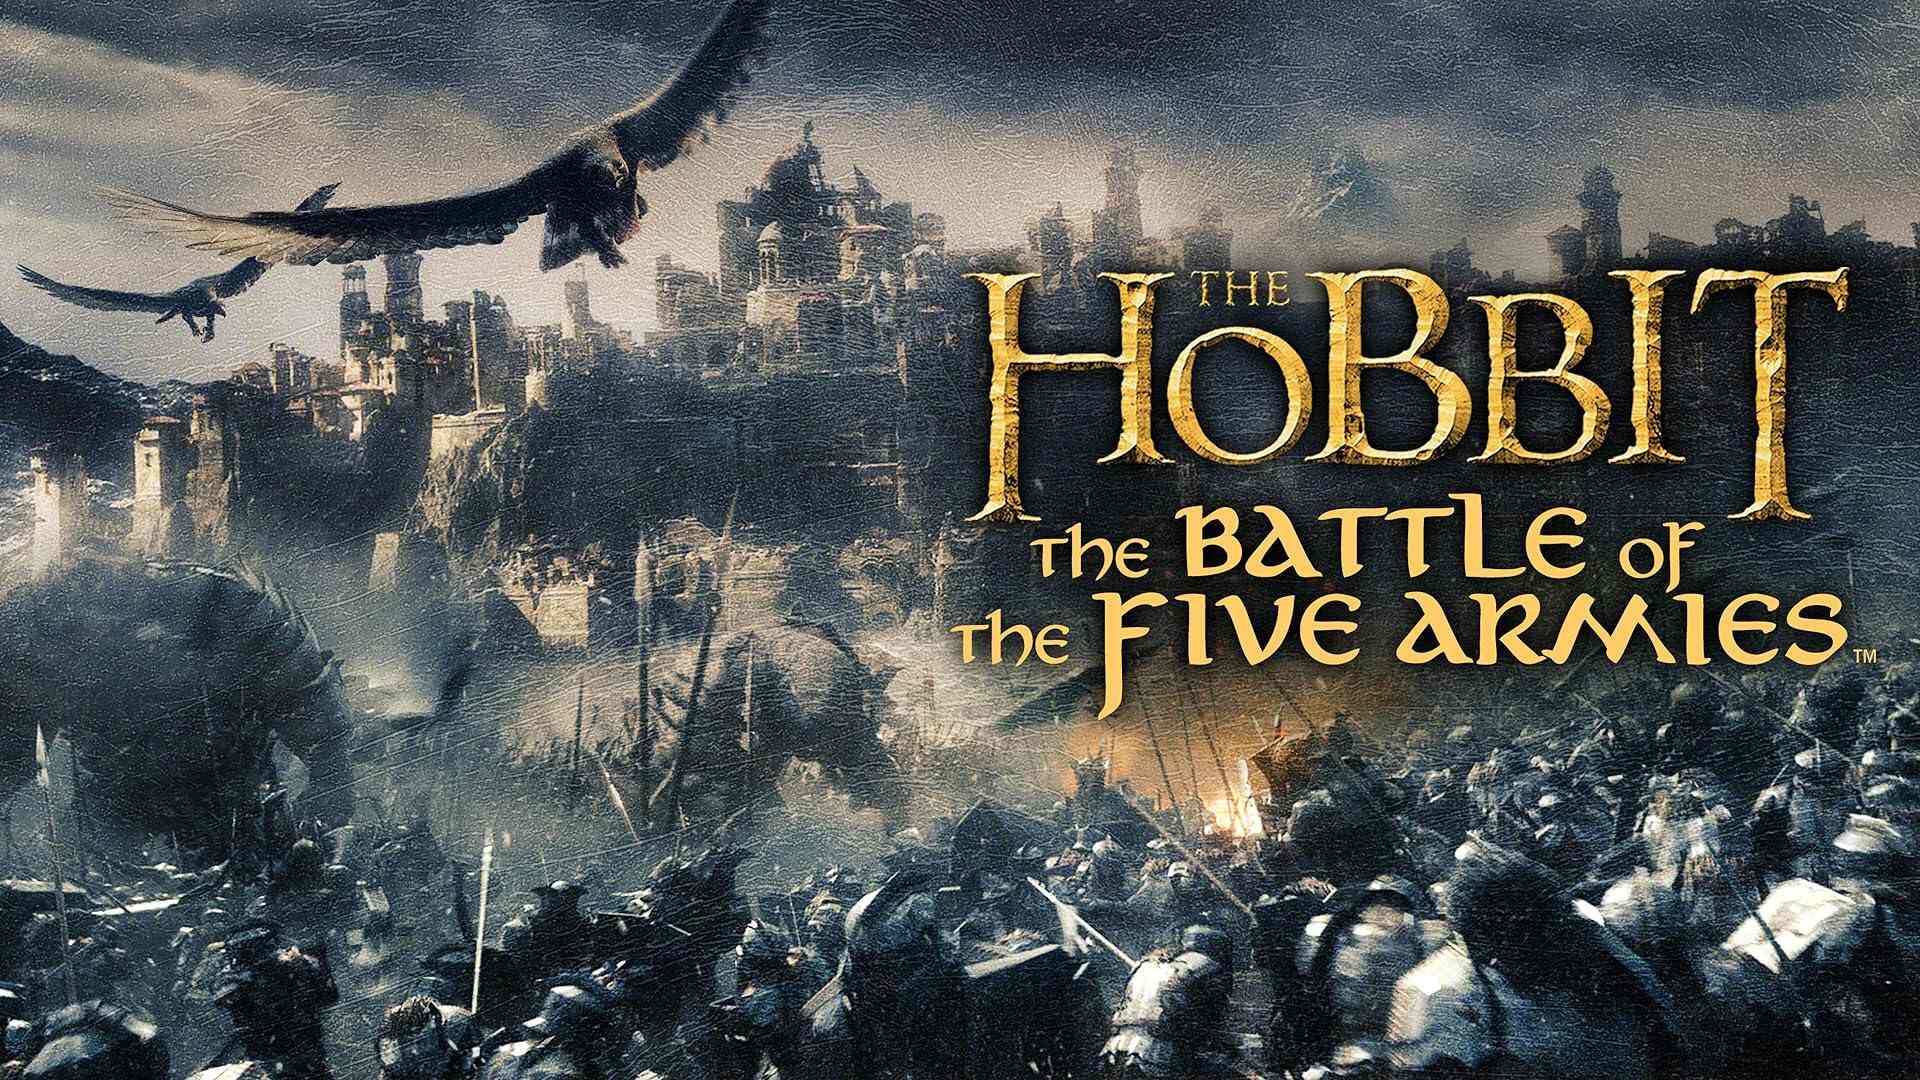 34-facts-about-the-movie-the-hobbit-the-battle-of-the-five-armies